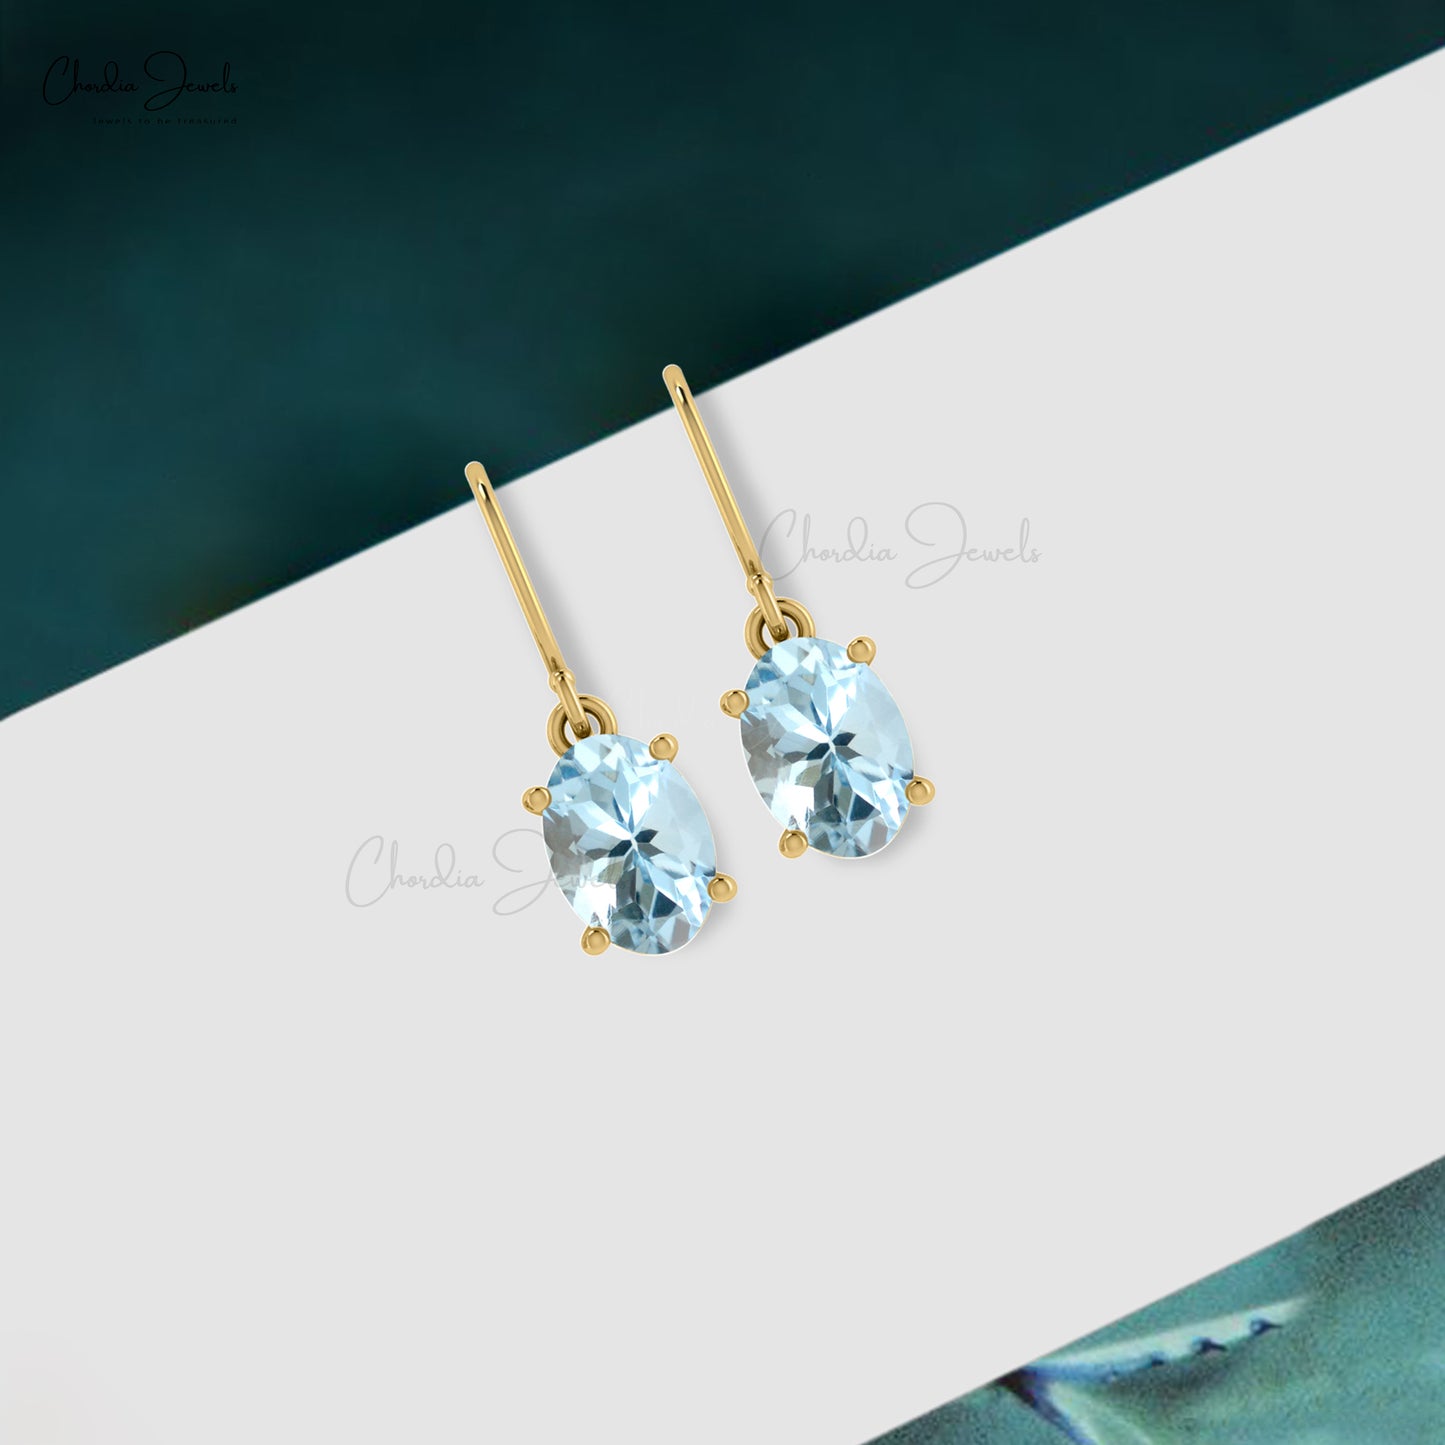 Natural Aquamarine Earring with 7x5mm Fish Hook Earwire